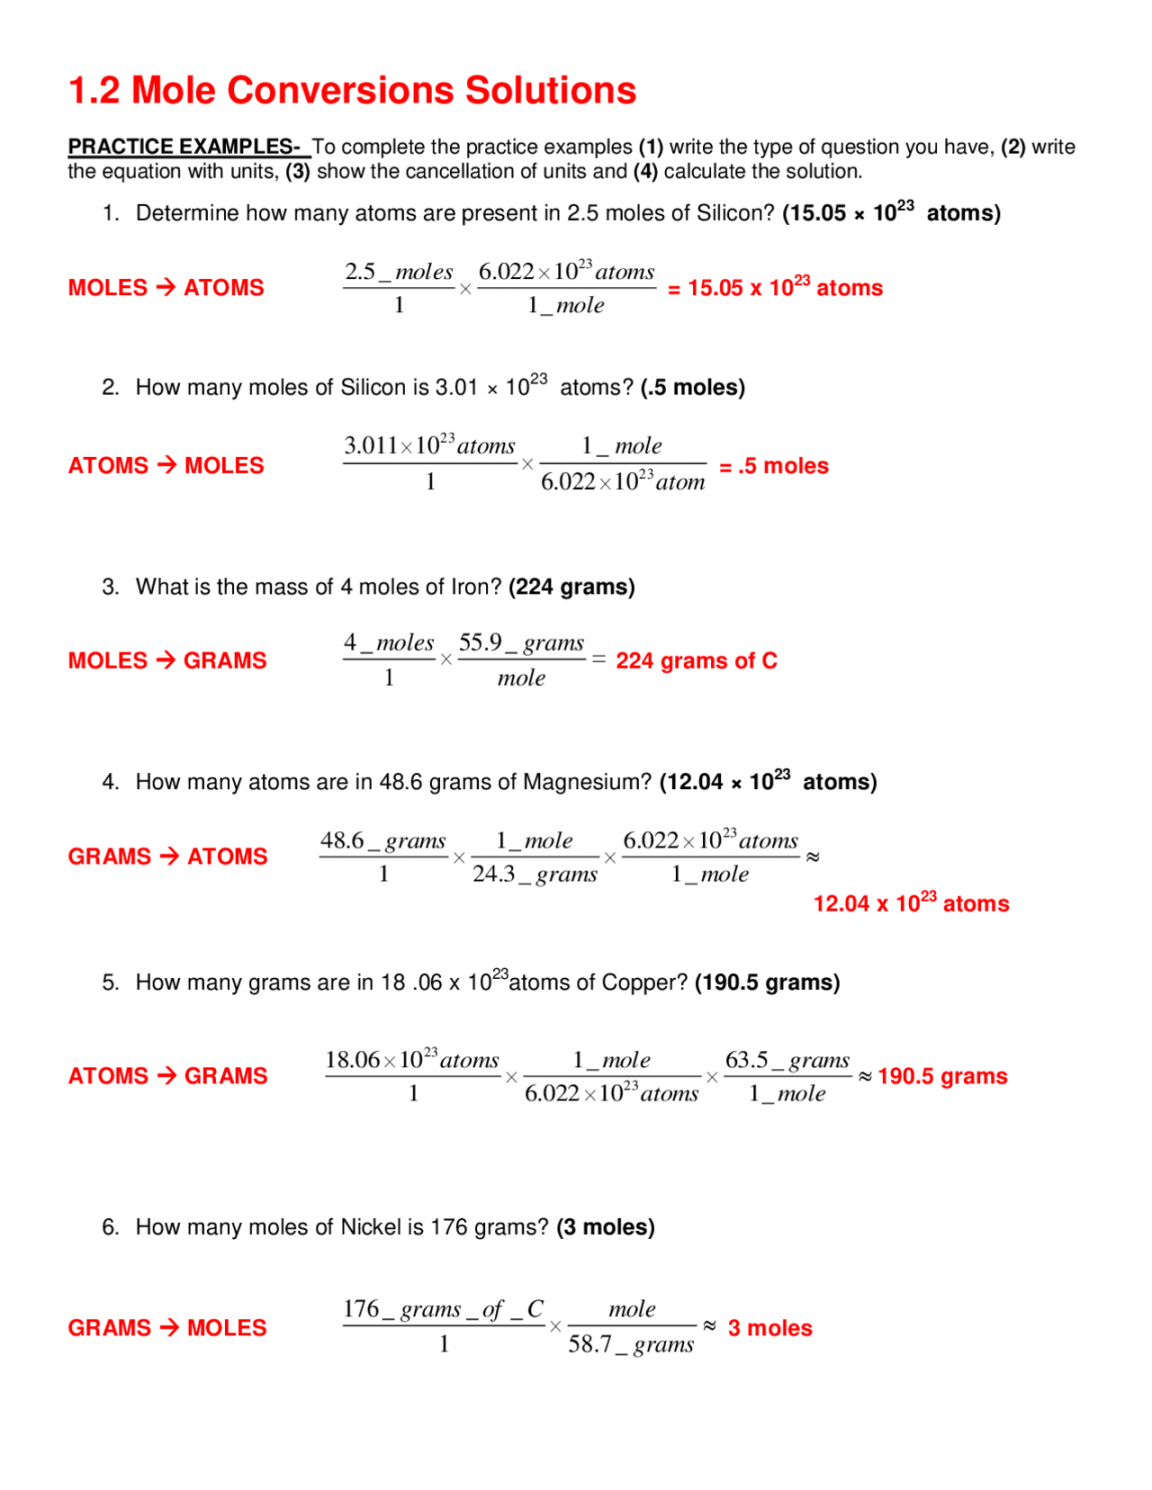 Mole Conversions Solutions Worksheet  Exercises Chemistry  Docsity